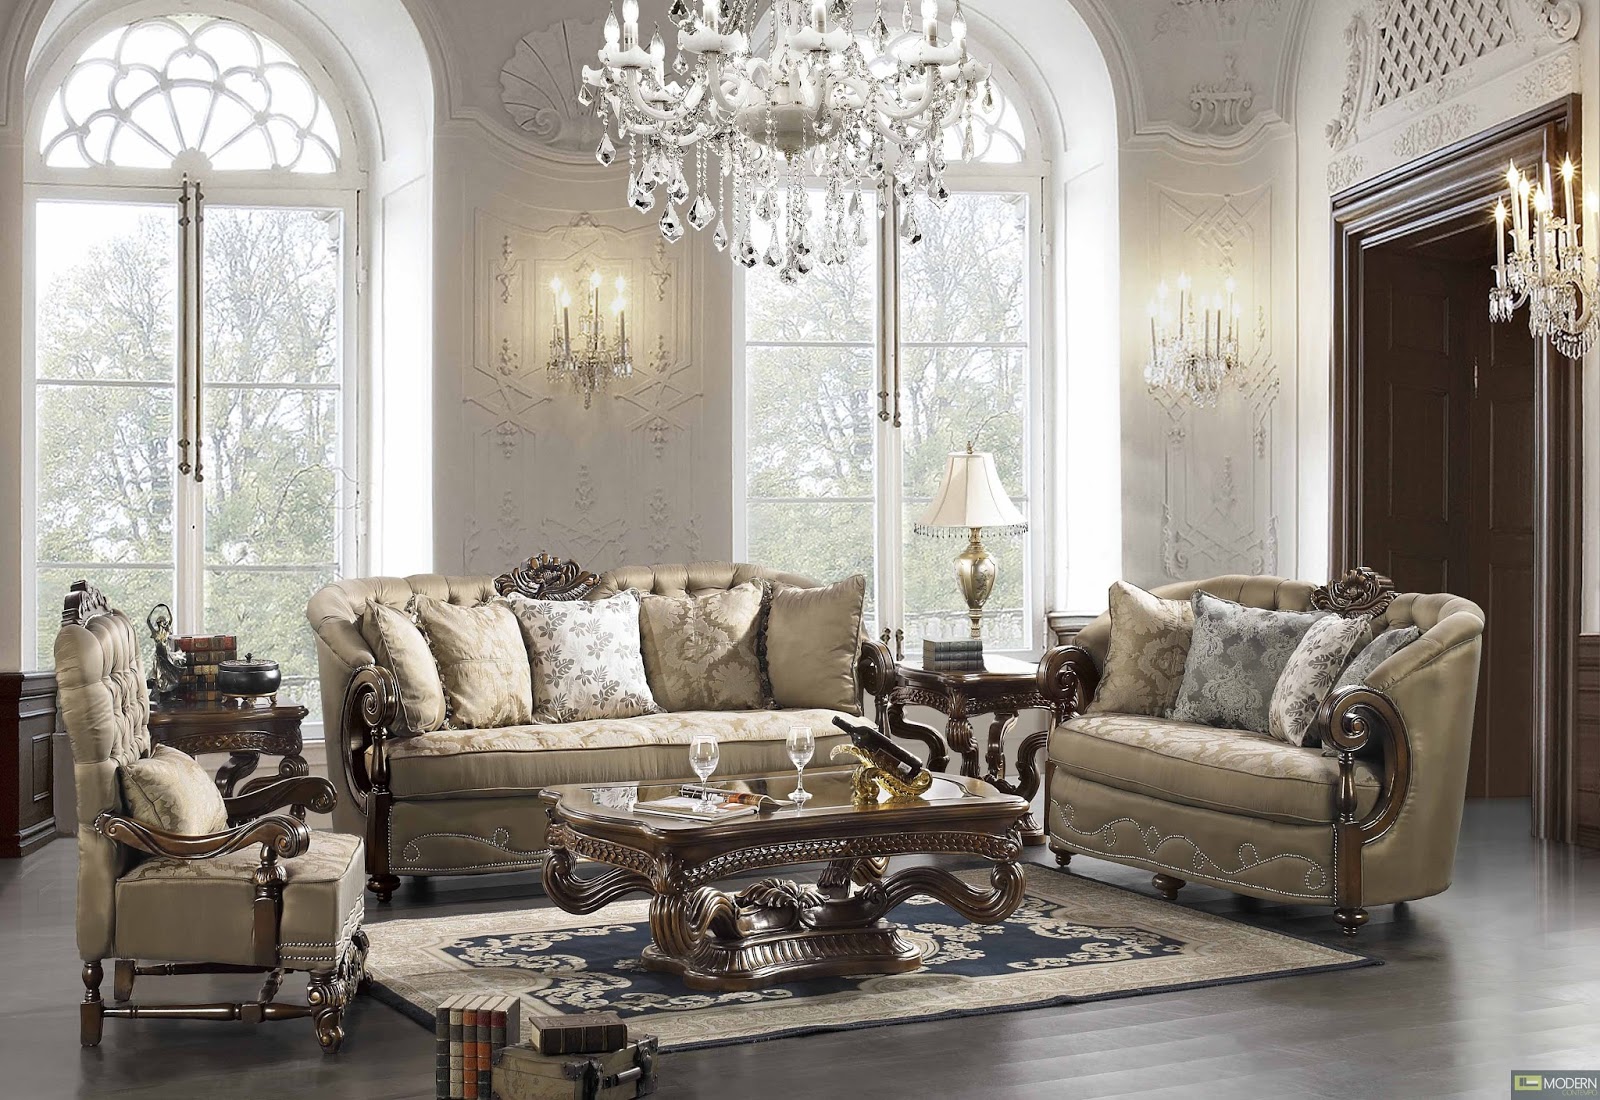 Best Furniture Ideas for Home: Traditional Classic Furniture Styles